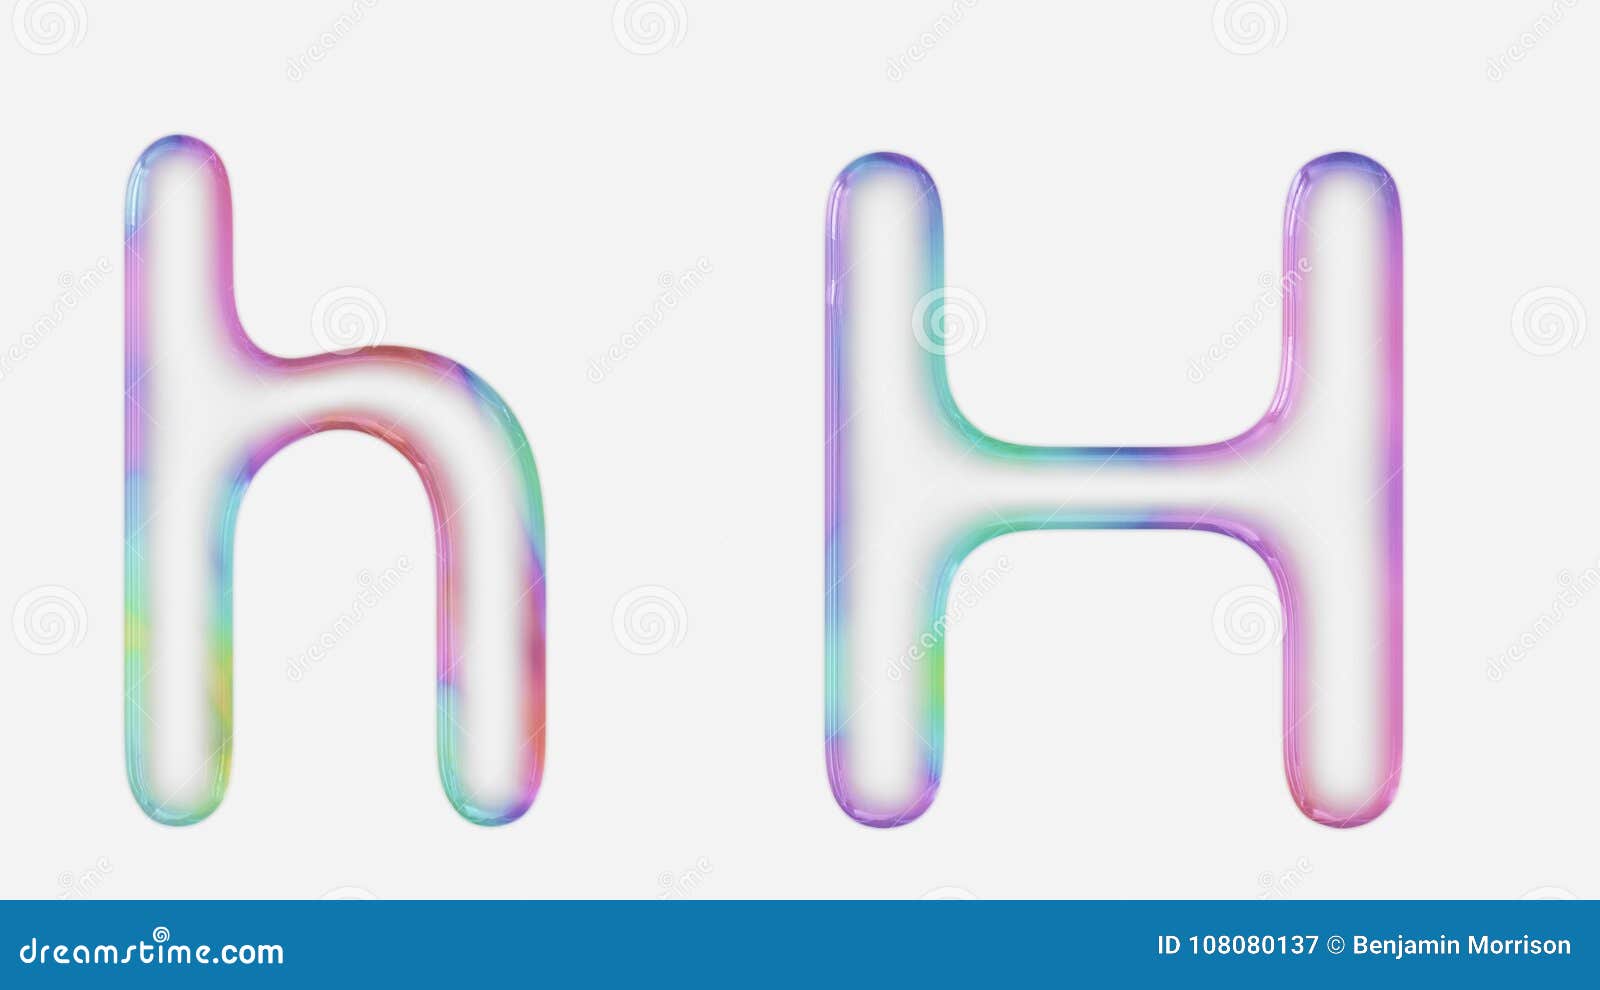 Vibrantly Colorful Upper And Lower Case H Rendered Using A Bubble